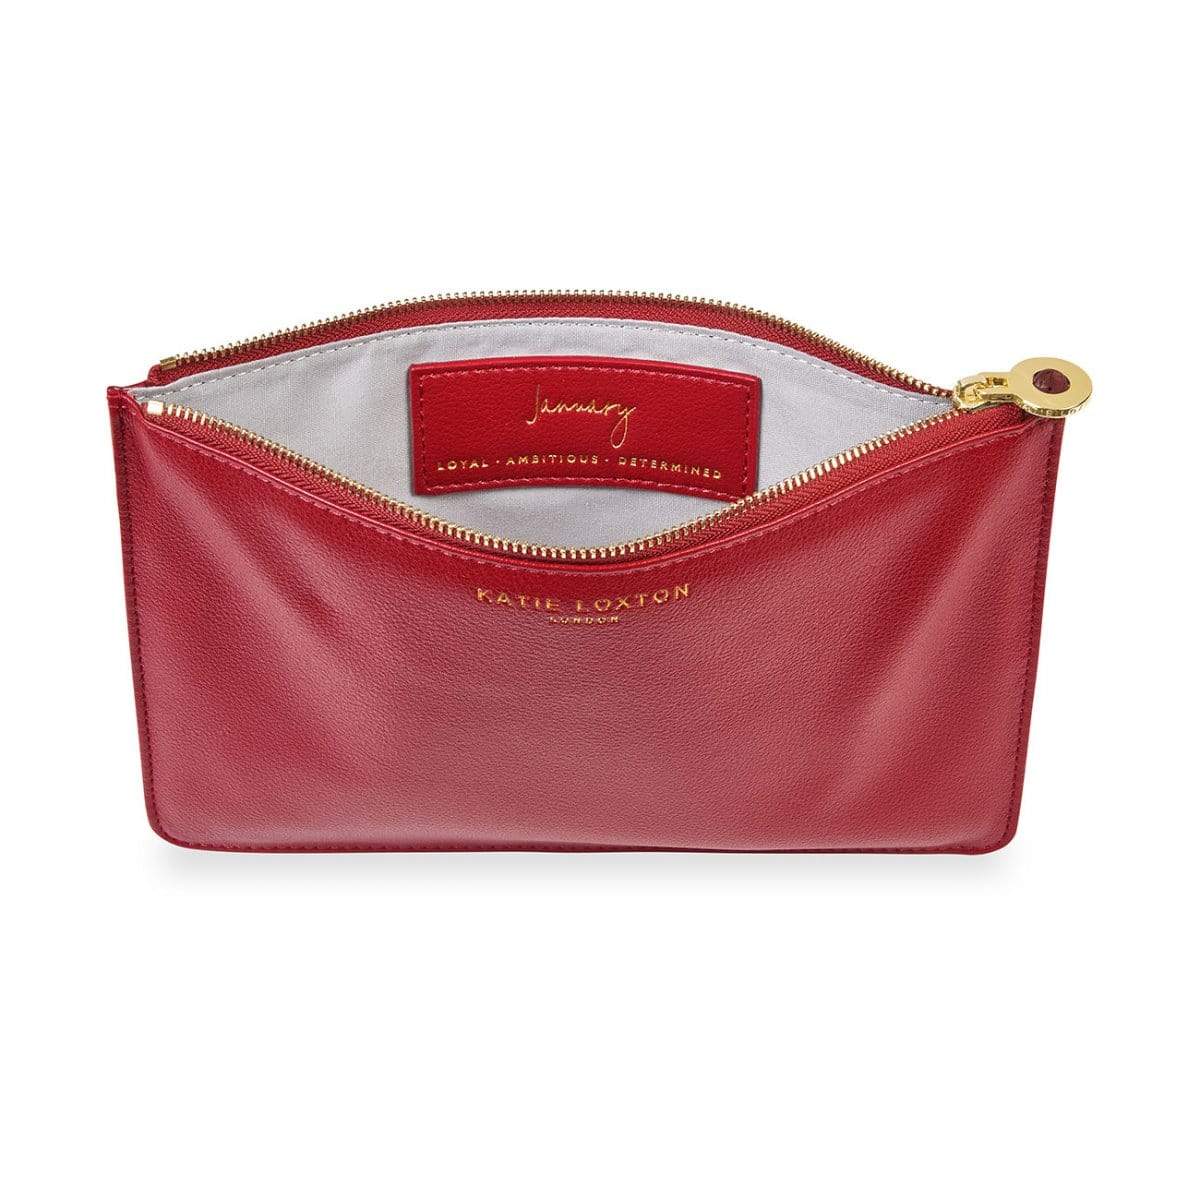 Katie Loxton Perfect Pouch Katie Loxton Birthstone Perfect Pouch - January Garnet - Dark Red